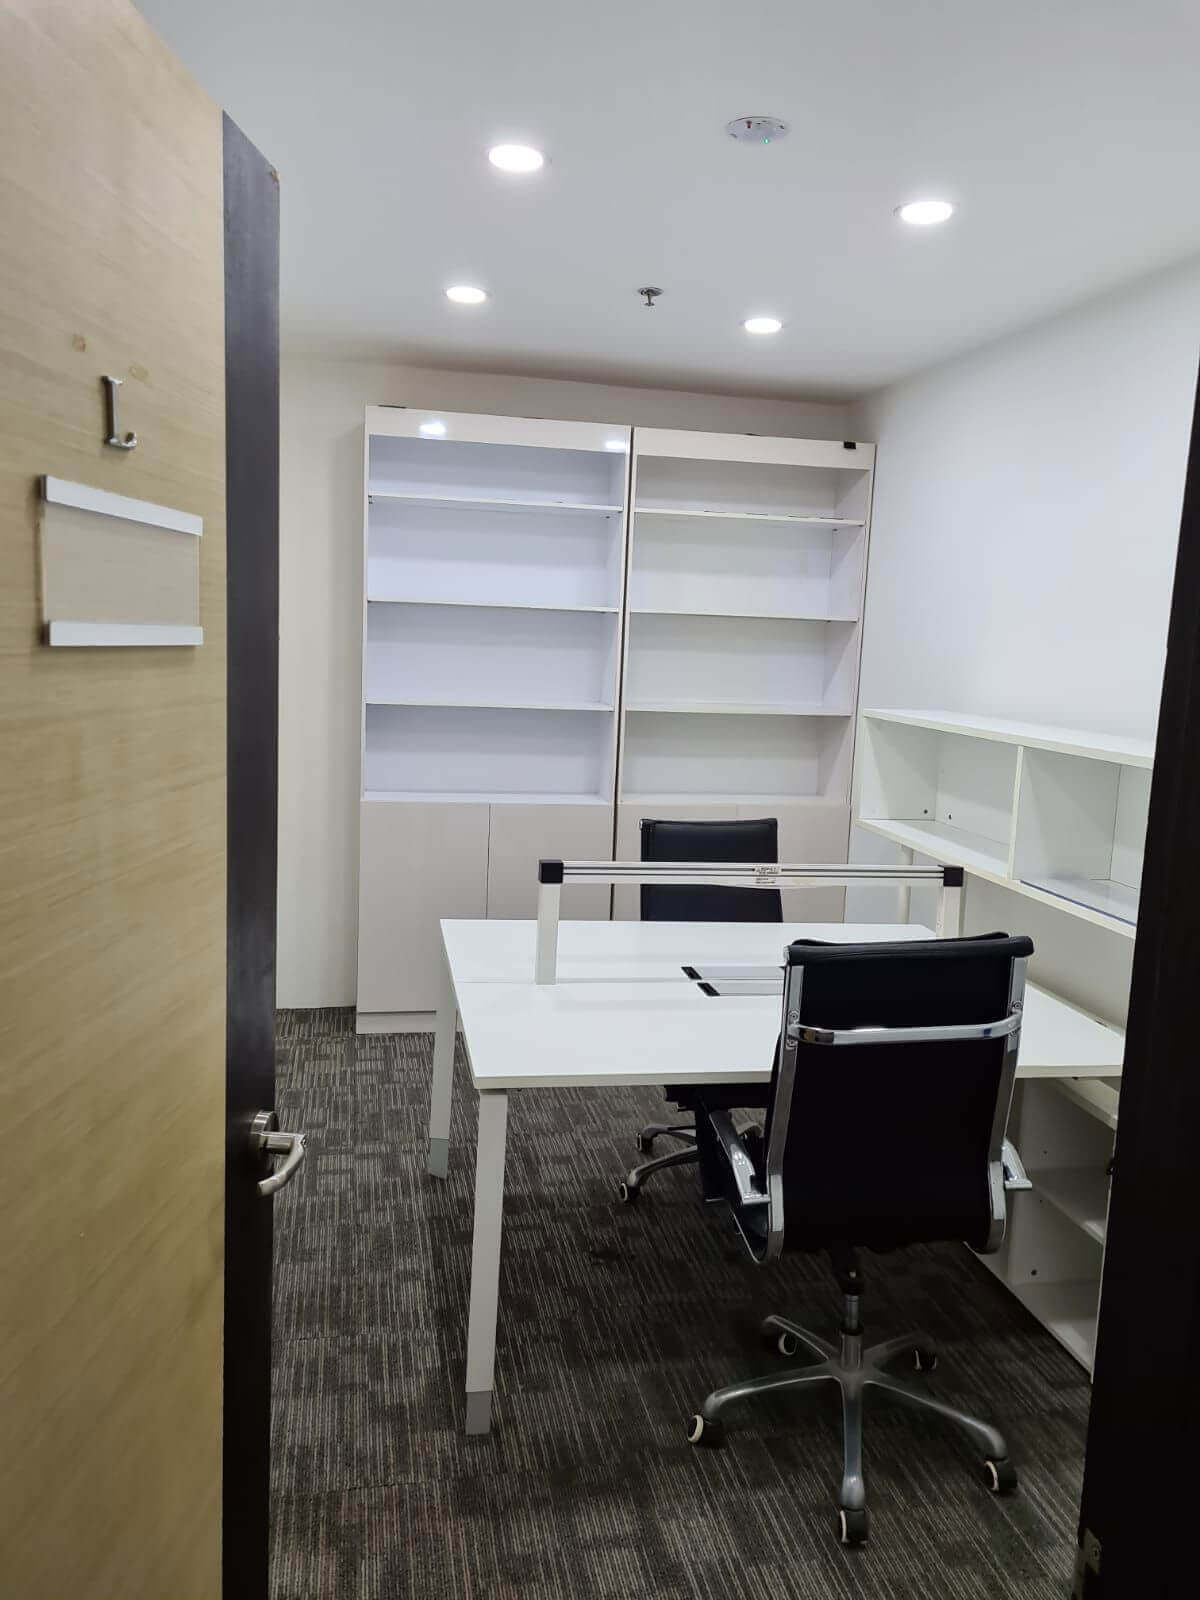 Highly Profitable Co-Work Office Space Biz For Sale At Price Of Real Estate Investment in Singapore